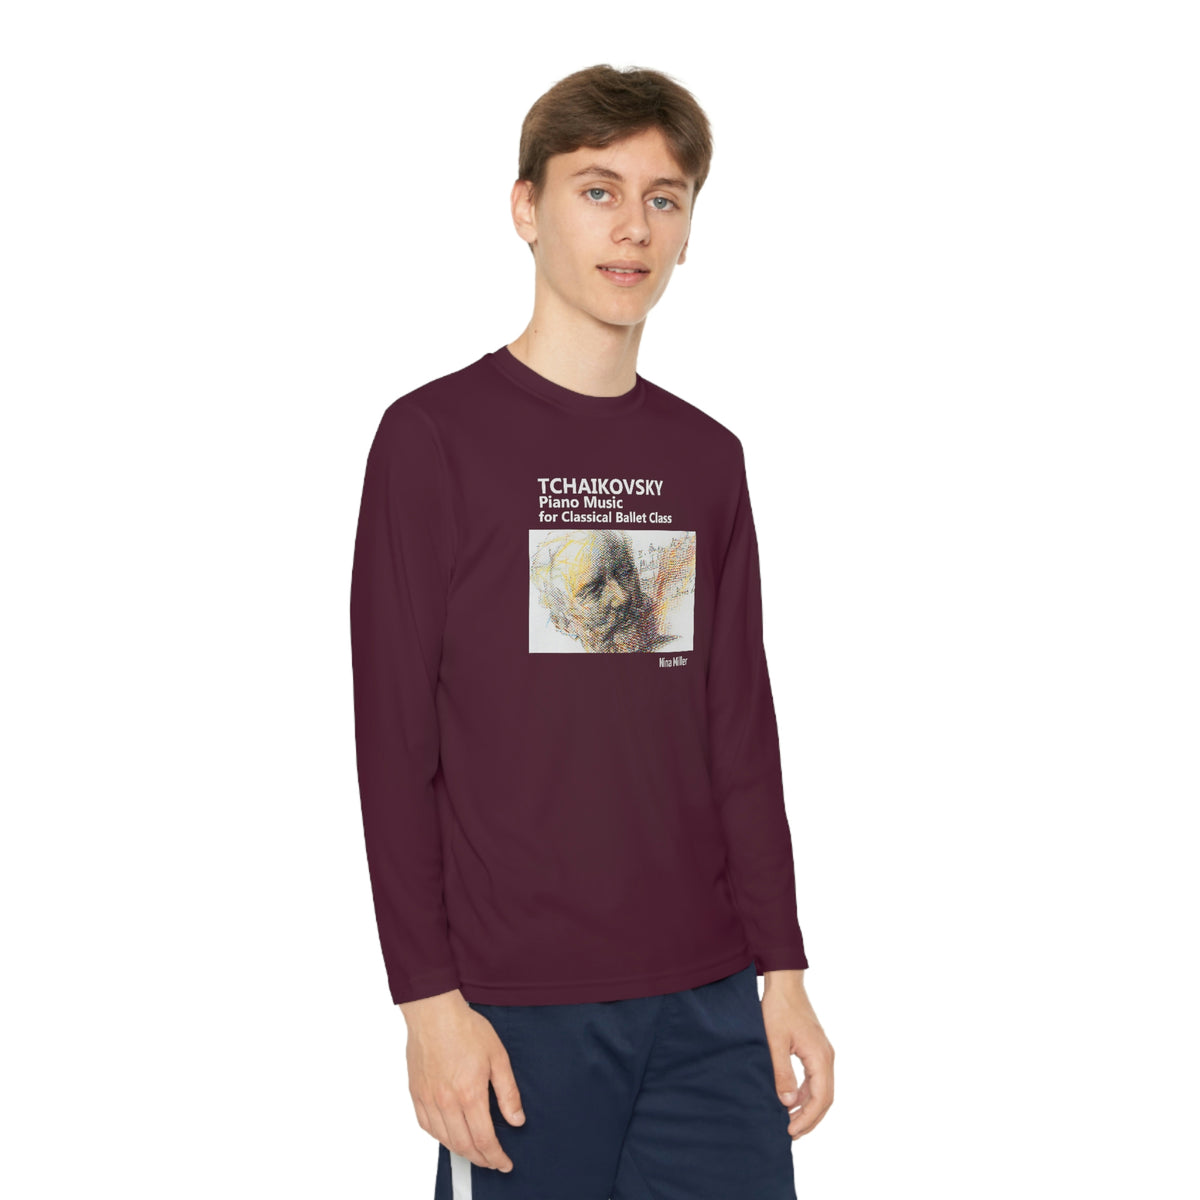 Tchaikovsky Piano Music - Youth Long Sleeve Competitor Tee